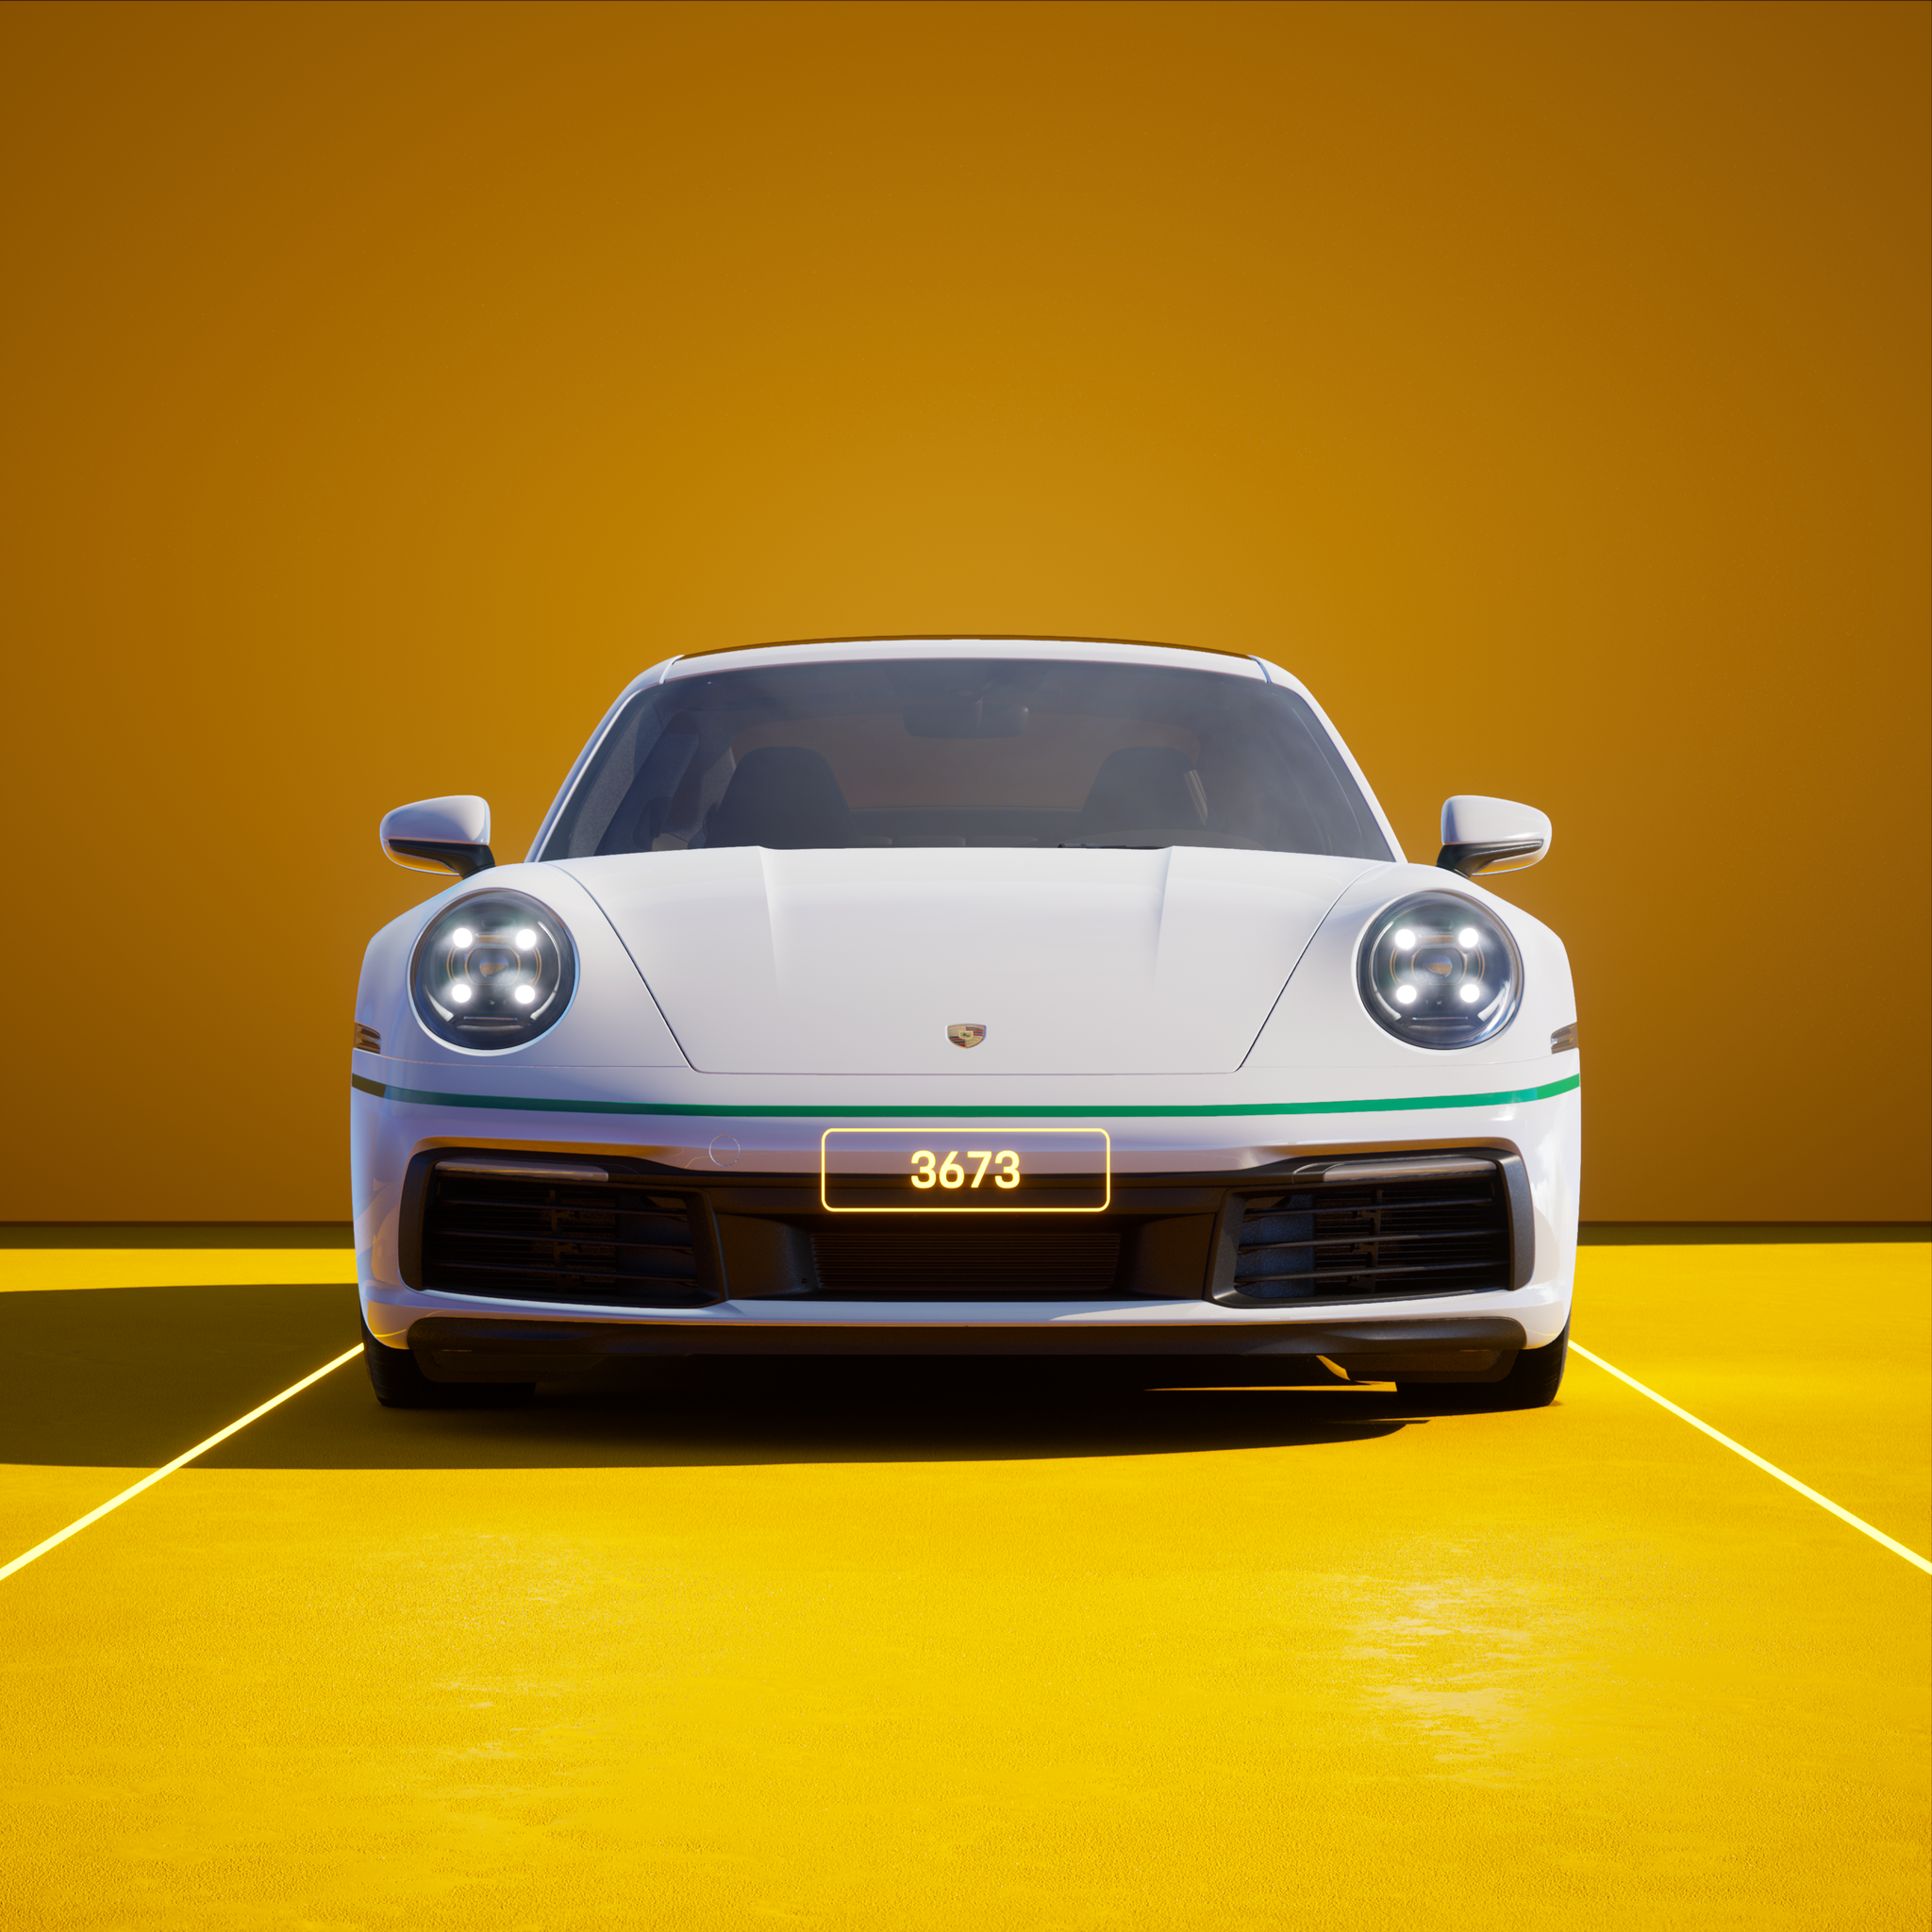 The PORSCHΞ 911 3673 image in phase